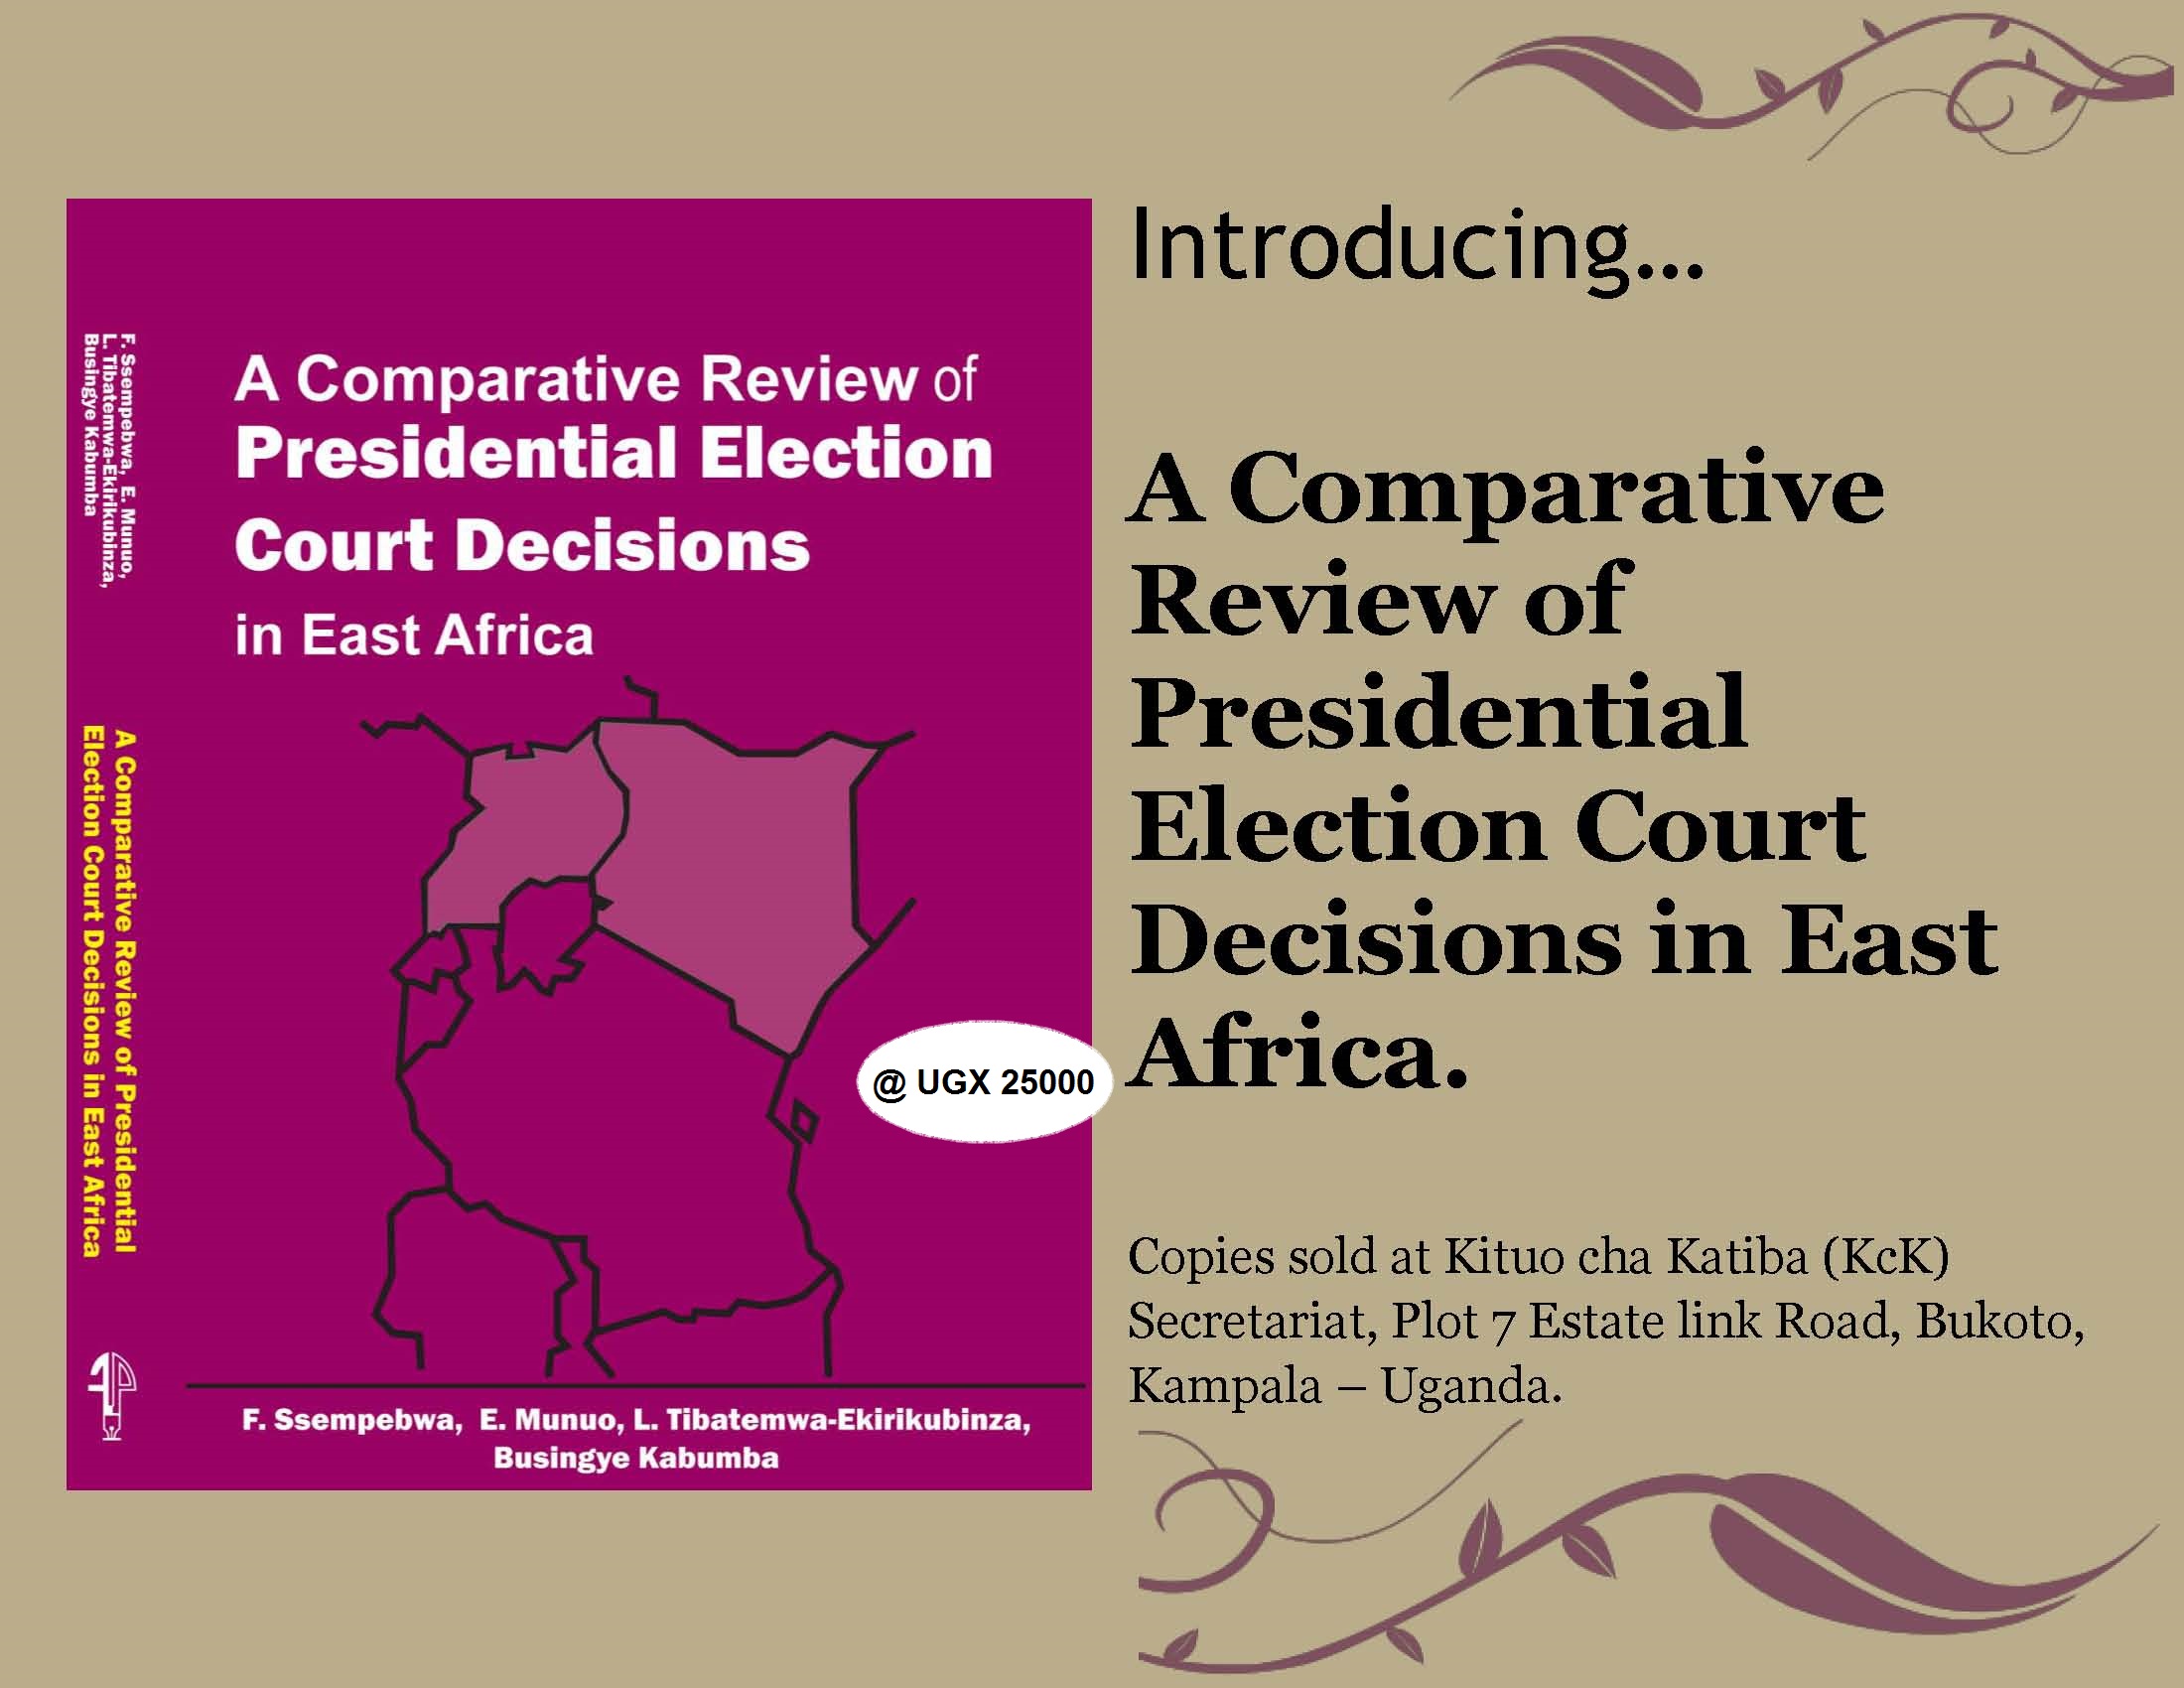 Publication: A Comparative Review of Presidential Election Court Decisions in East Africa